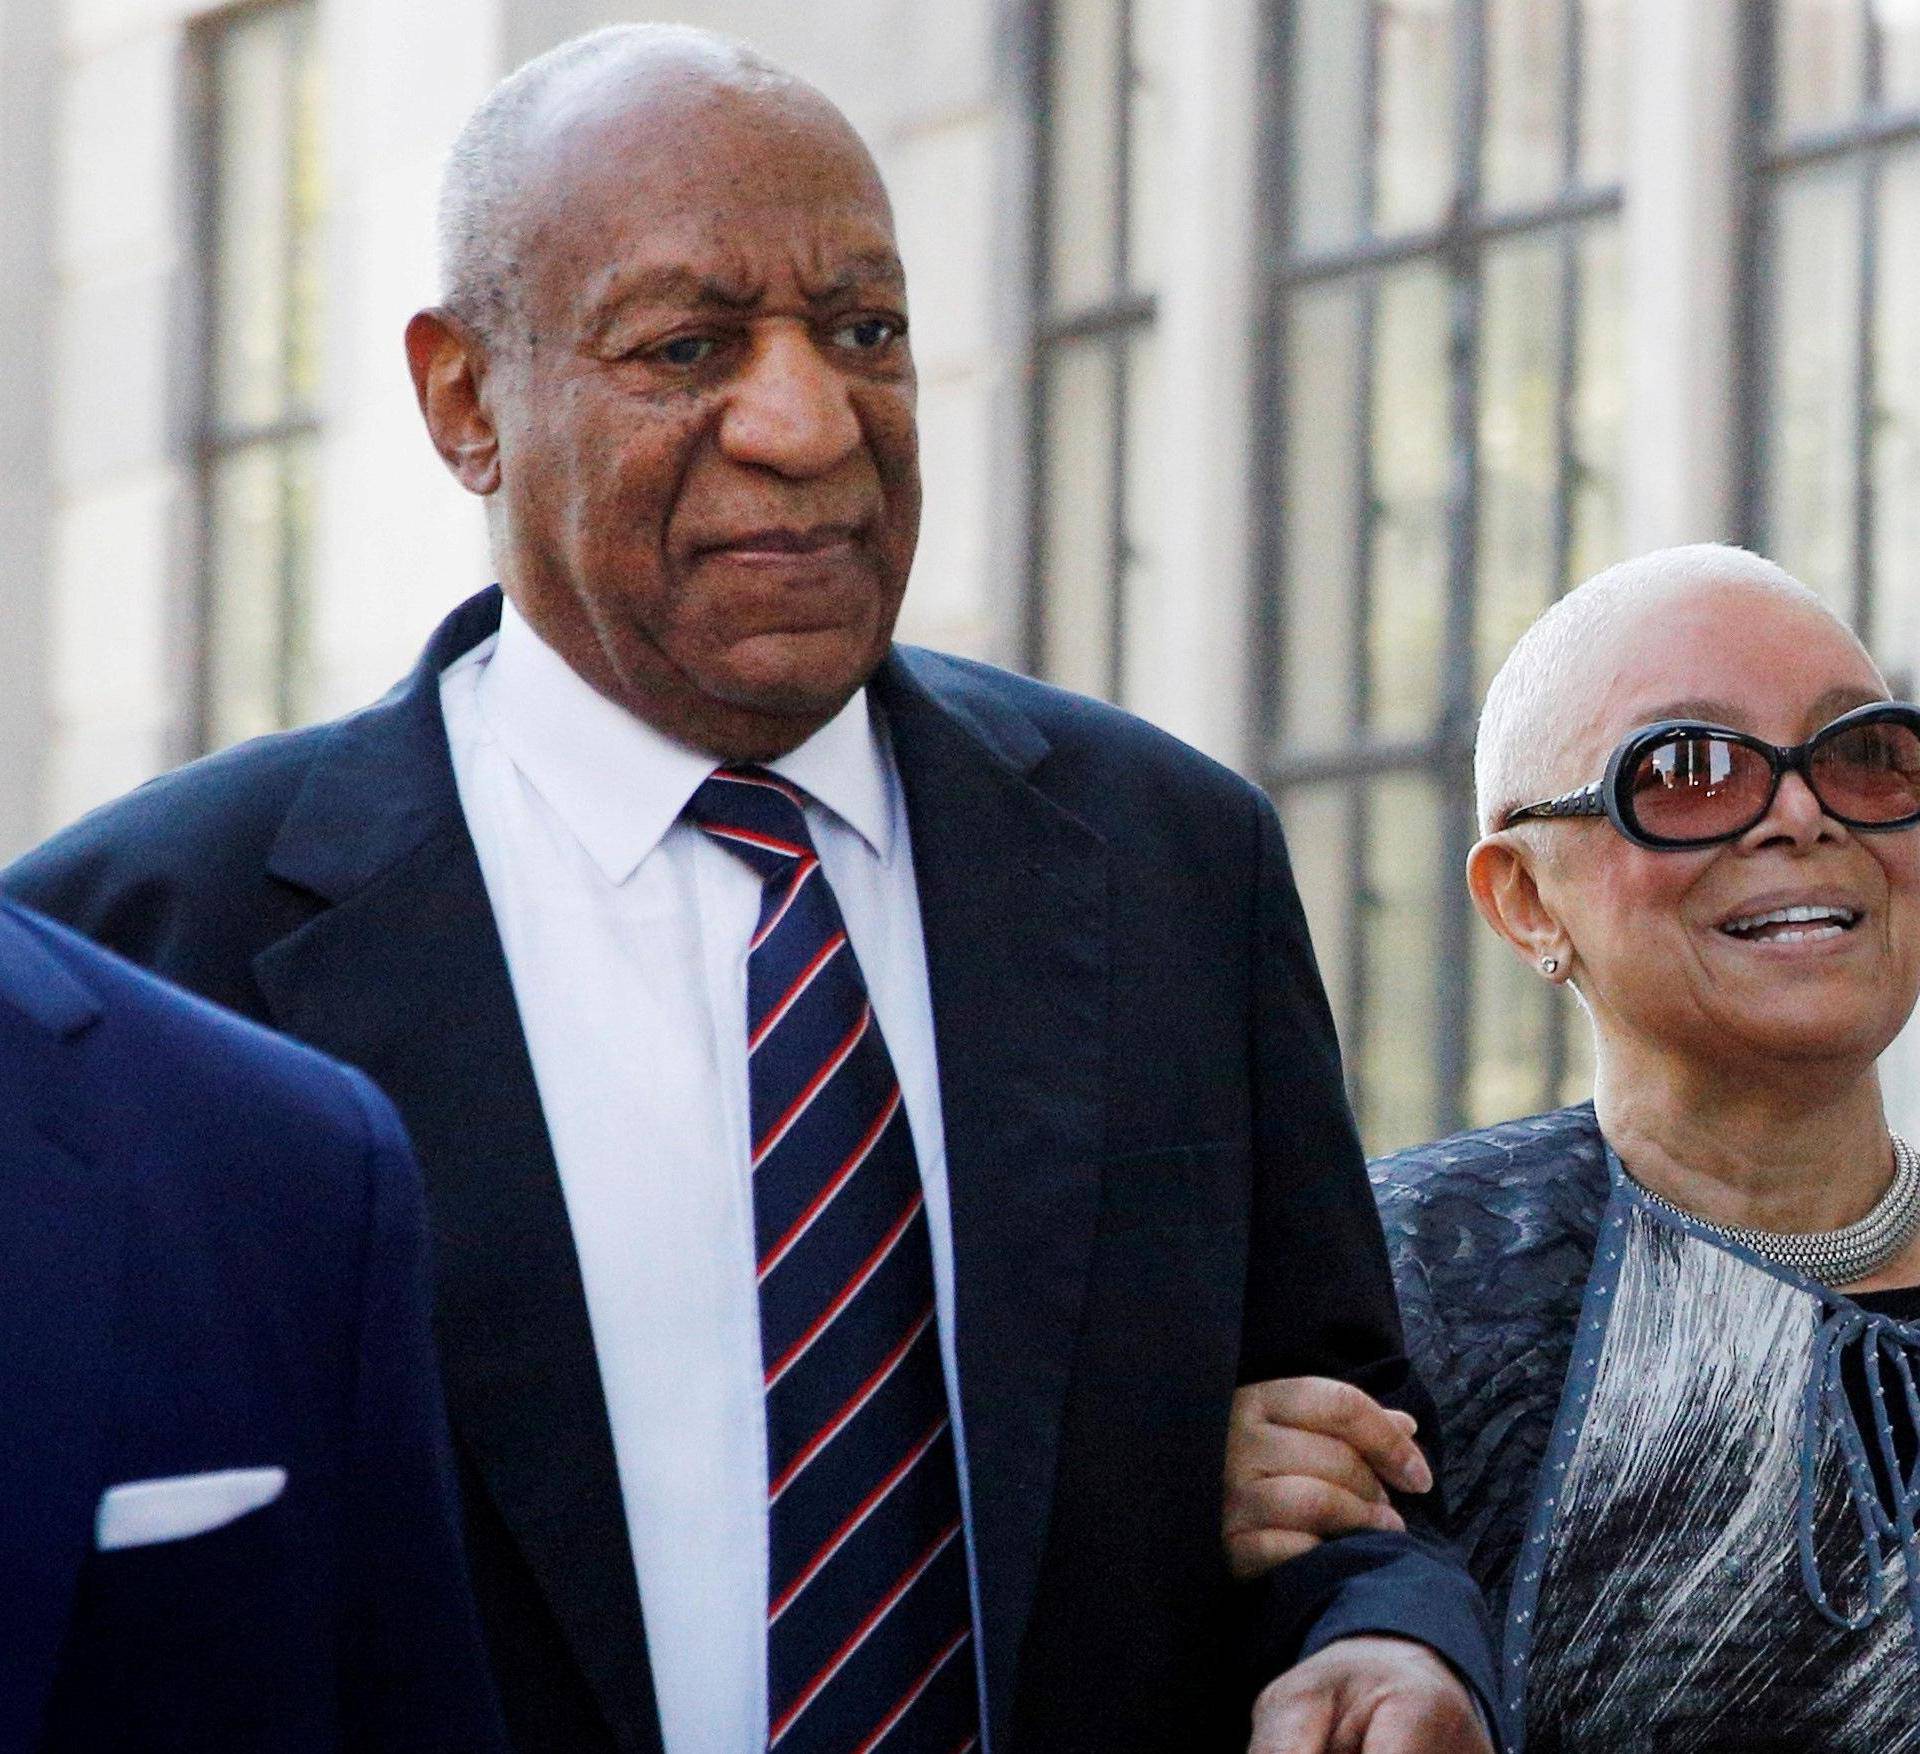 FILE PHOTO: Actor and comedian Bill Cosby arrives with his wife Camille for his sexual assault trial at the Montgomery County Courthouse in Norristown